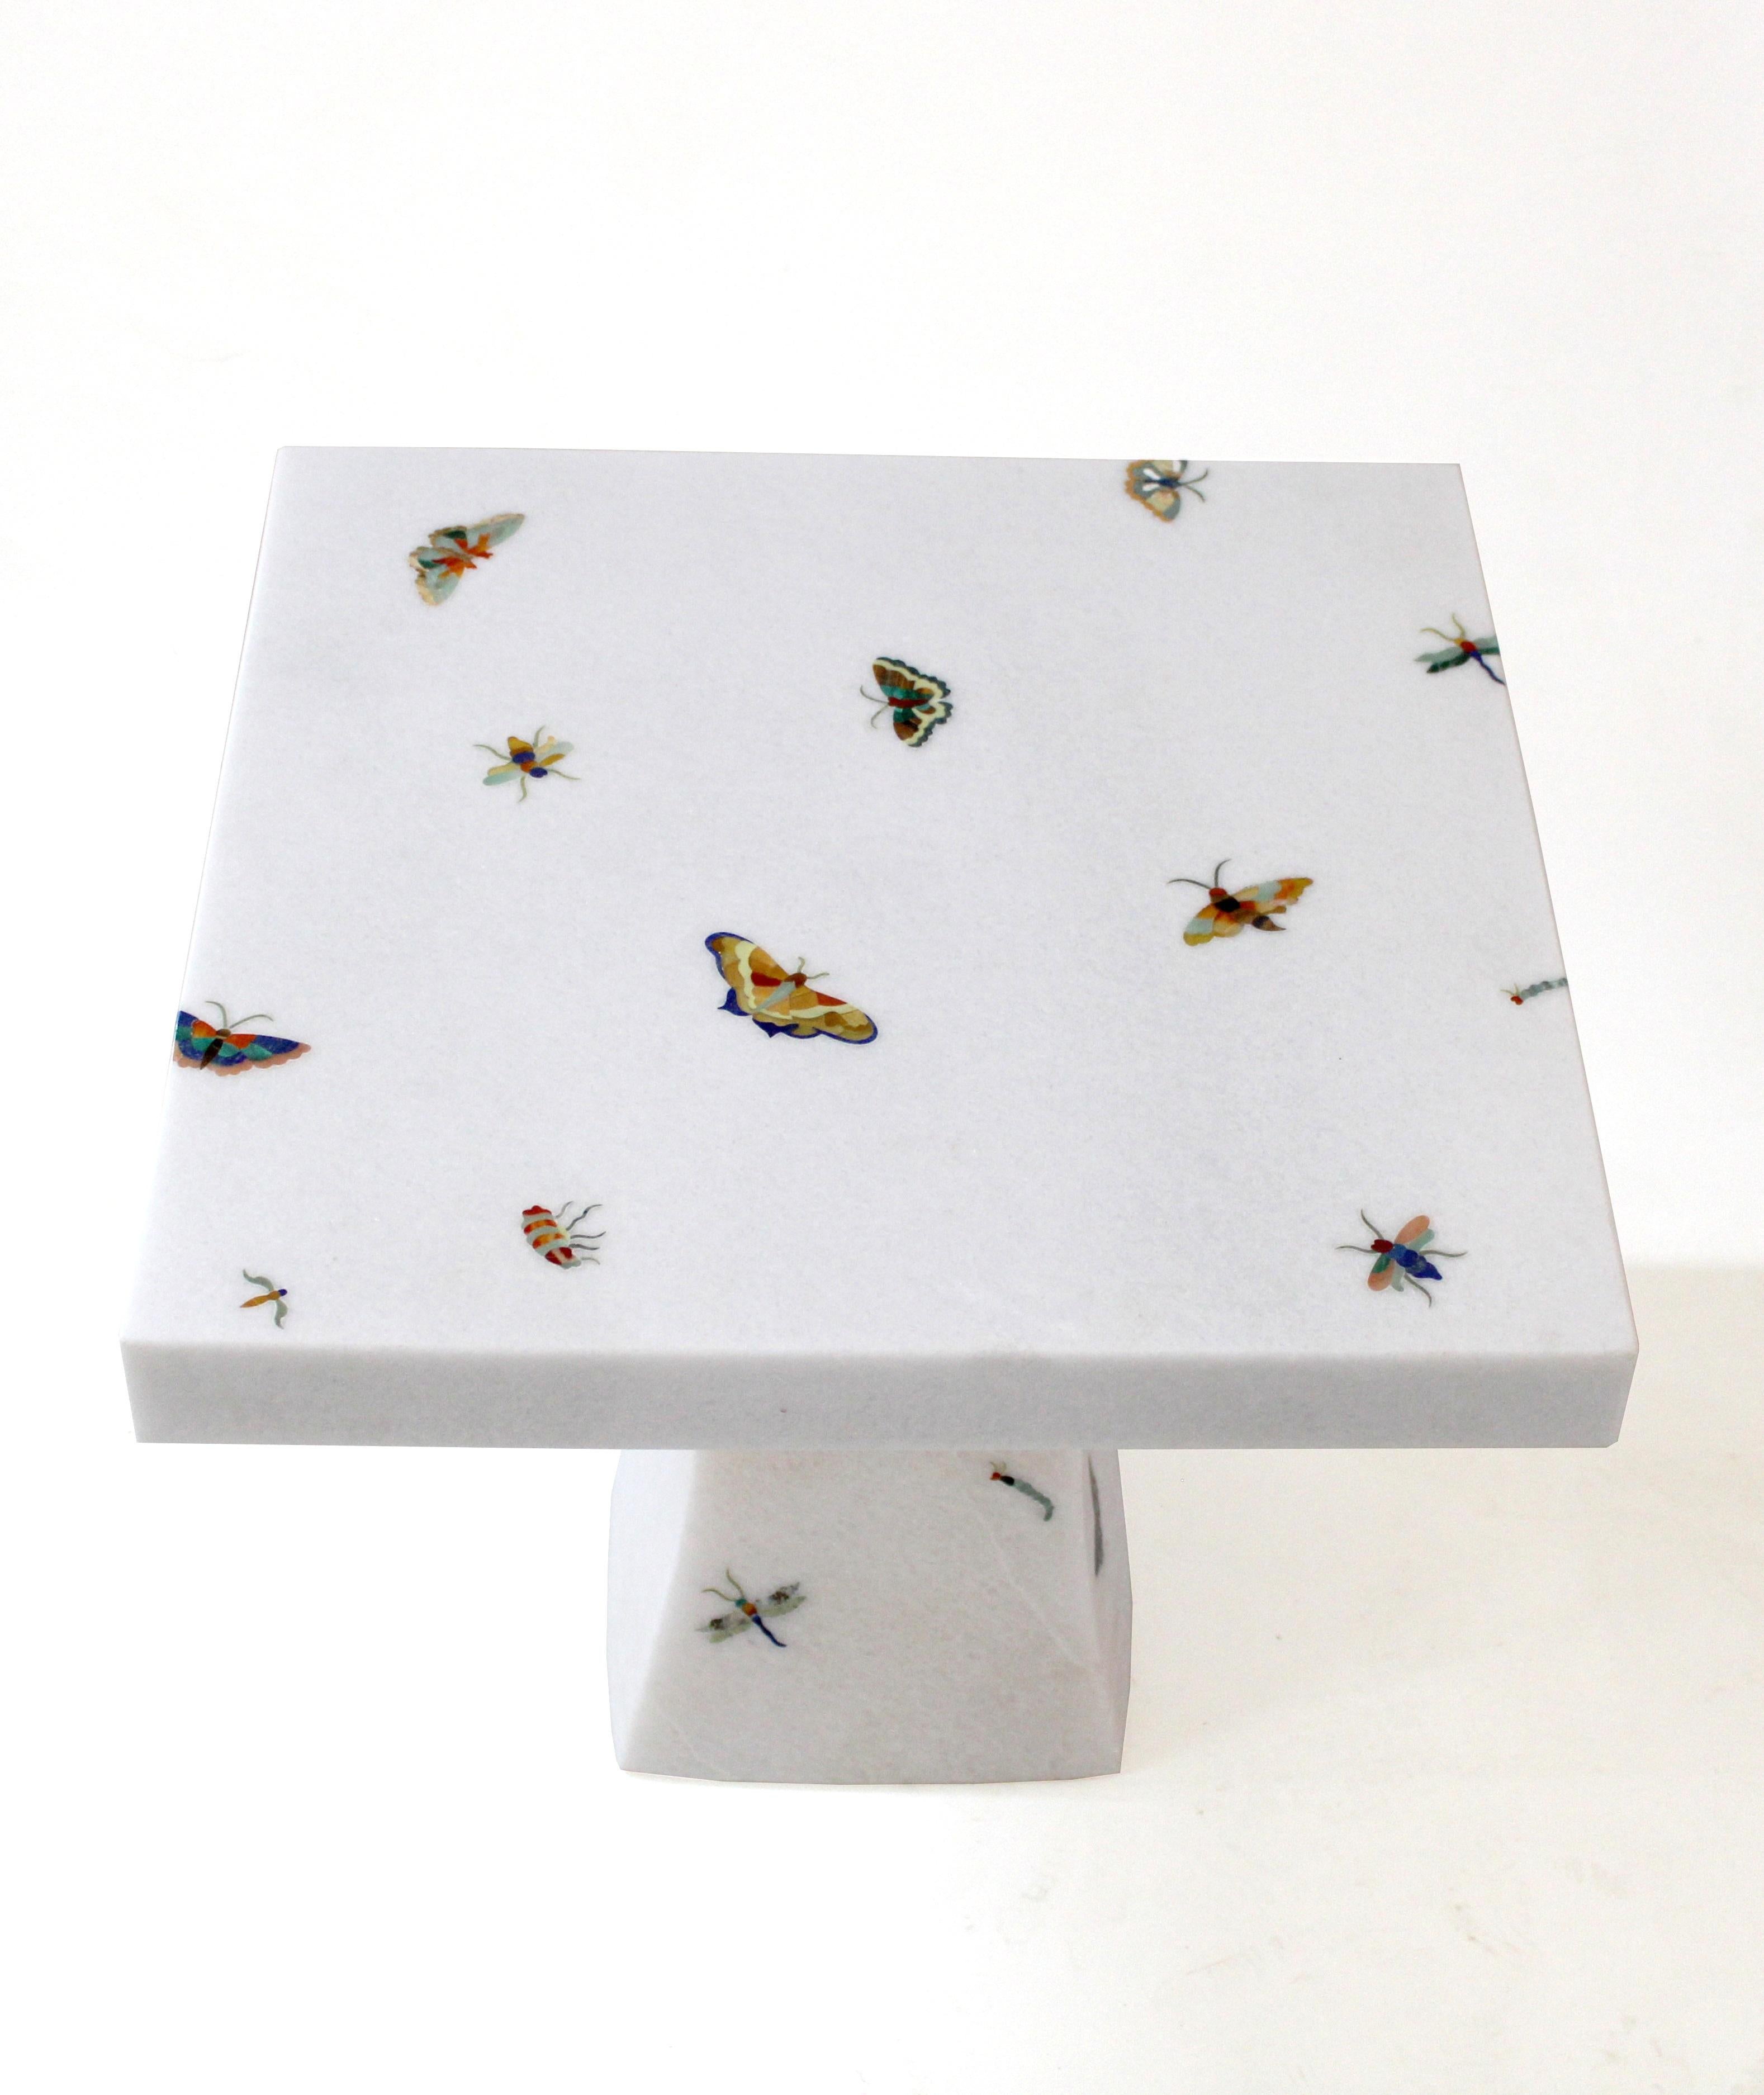 The butterfly table is a part of the Ornamenti collection. Delicately cut pieces of agate, tiger eyes, mother of pearl and other semi precious stones are made into butterfly patterns and carefully inlaid into the base stone by our master craftsmen.